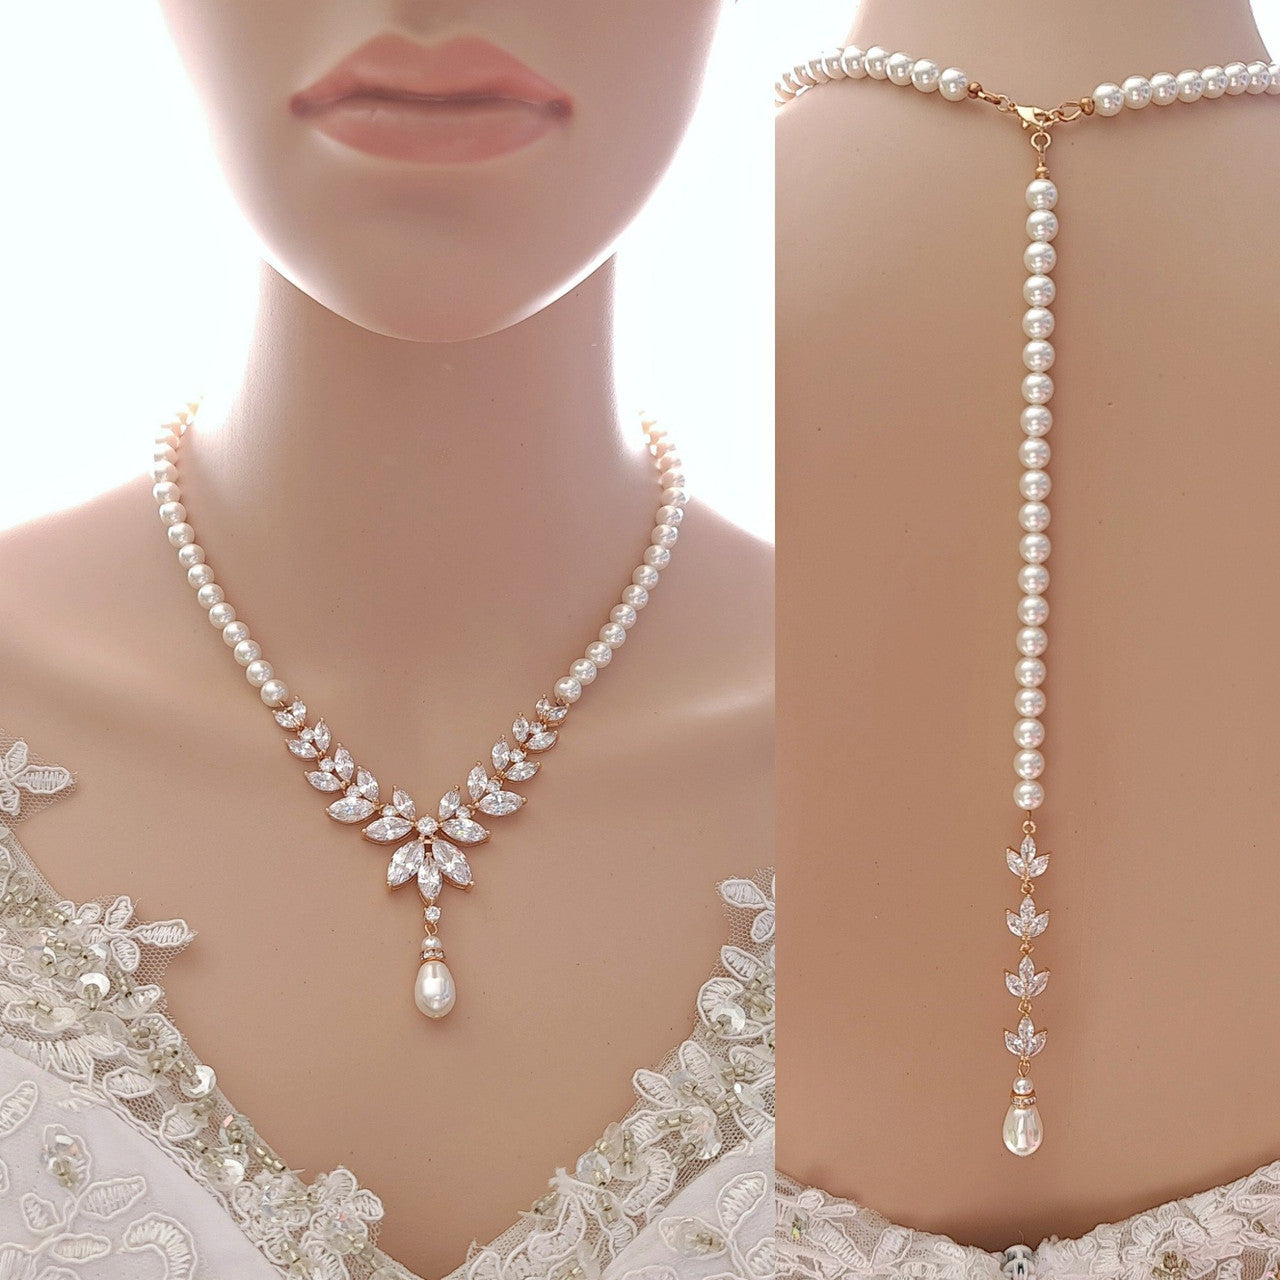 Pearl Bridal Jewelry Set in Ivory White Pearl Color with Necklace, Backdrop & Earrings-Katie